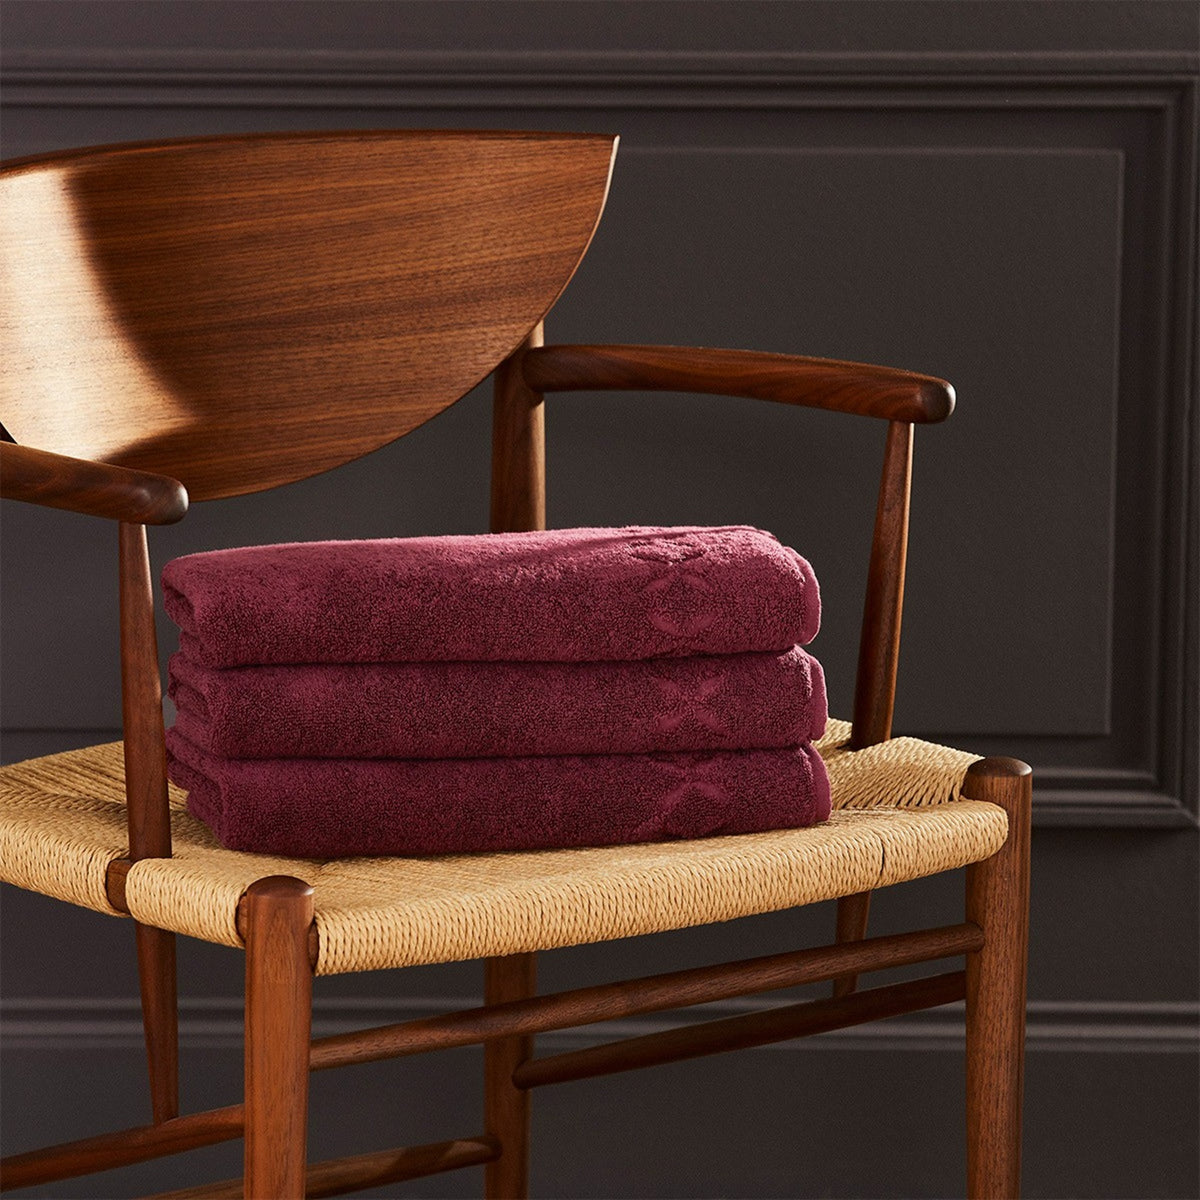 Folded Silo of Yves Delorme Nature Bath Towels on a Chair in Prune Color